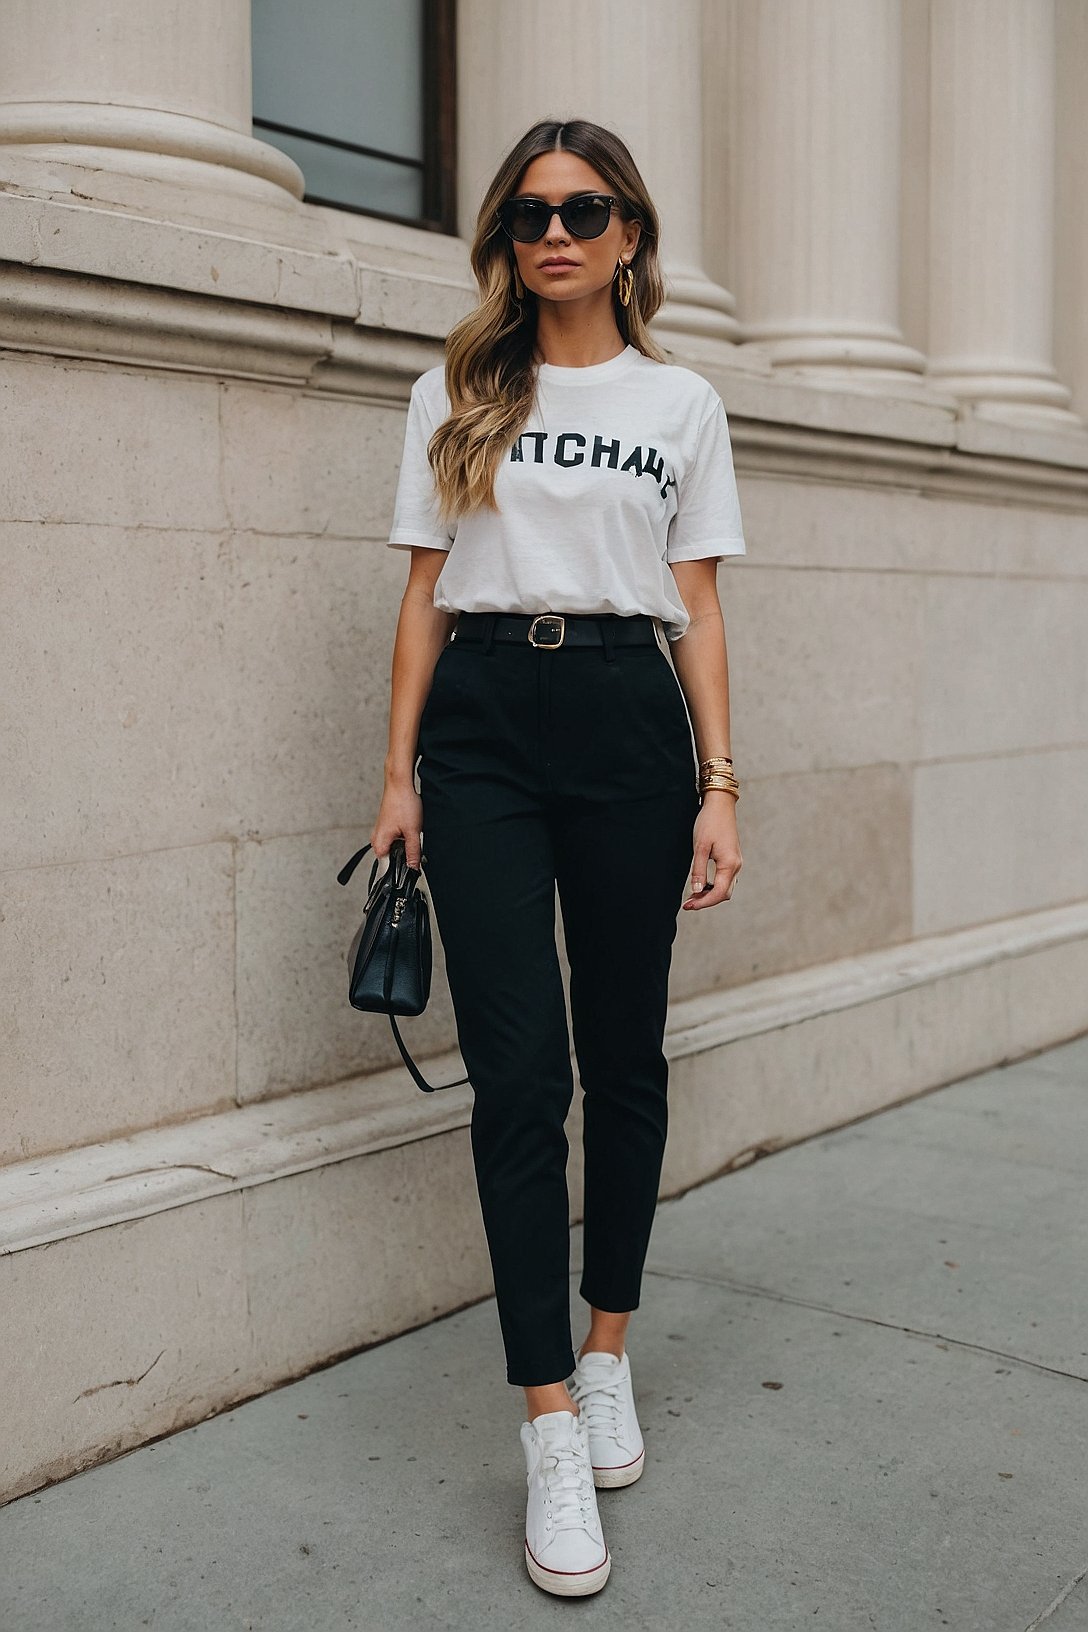 Downtown Chic Tee